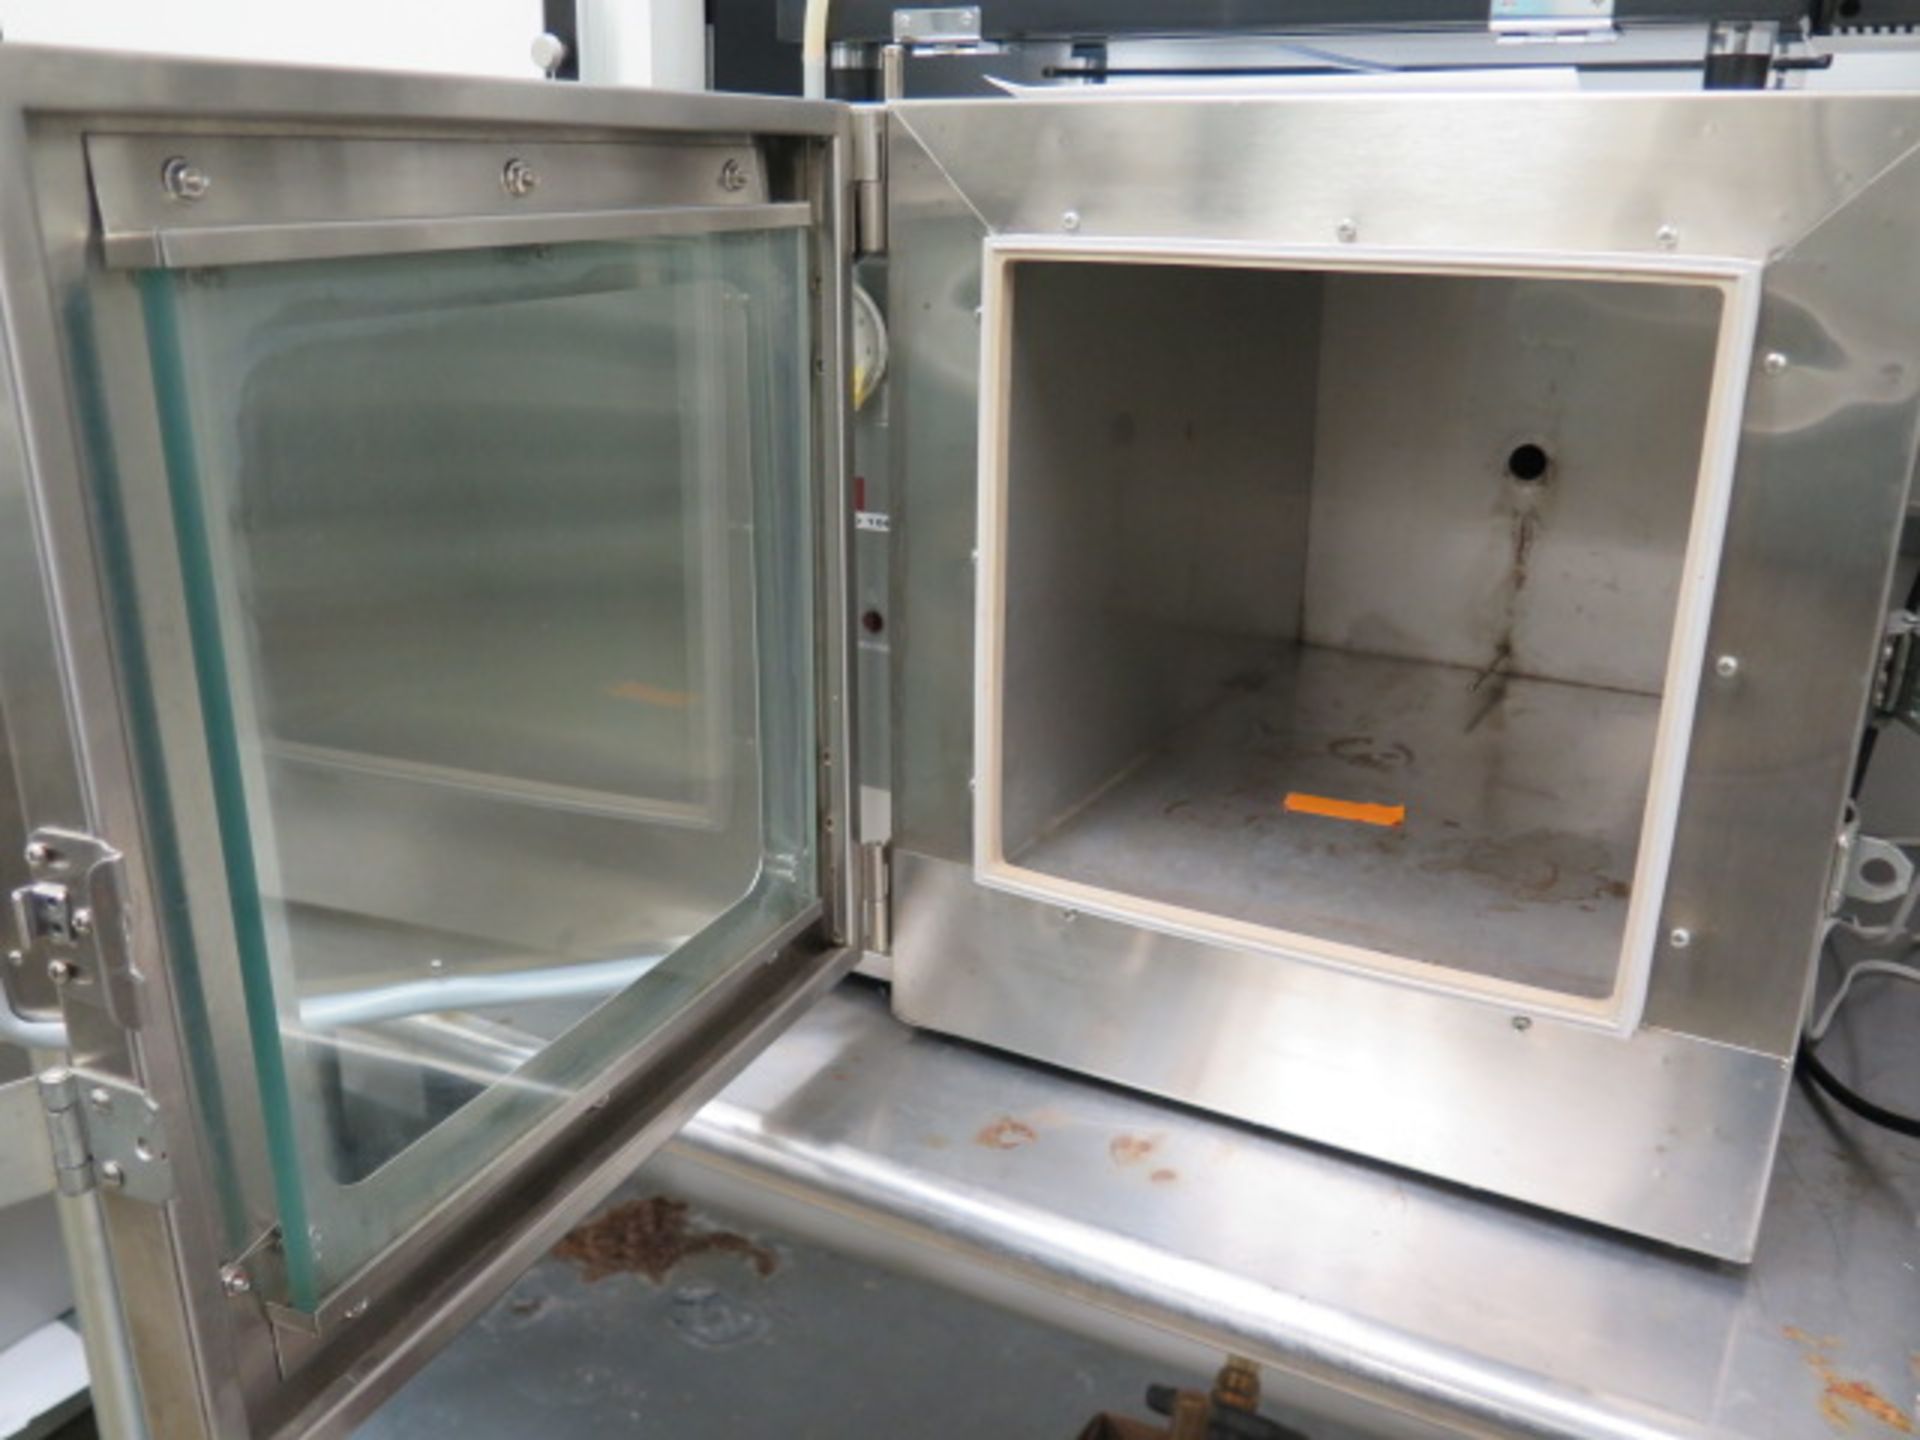 VWR mdl. 1430M Vacuum Oven s/n 1201098 60-105 Degrees C (SOLD AS-IS - NO WARRANTY) - Image 6 of 10